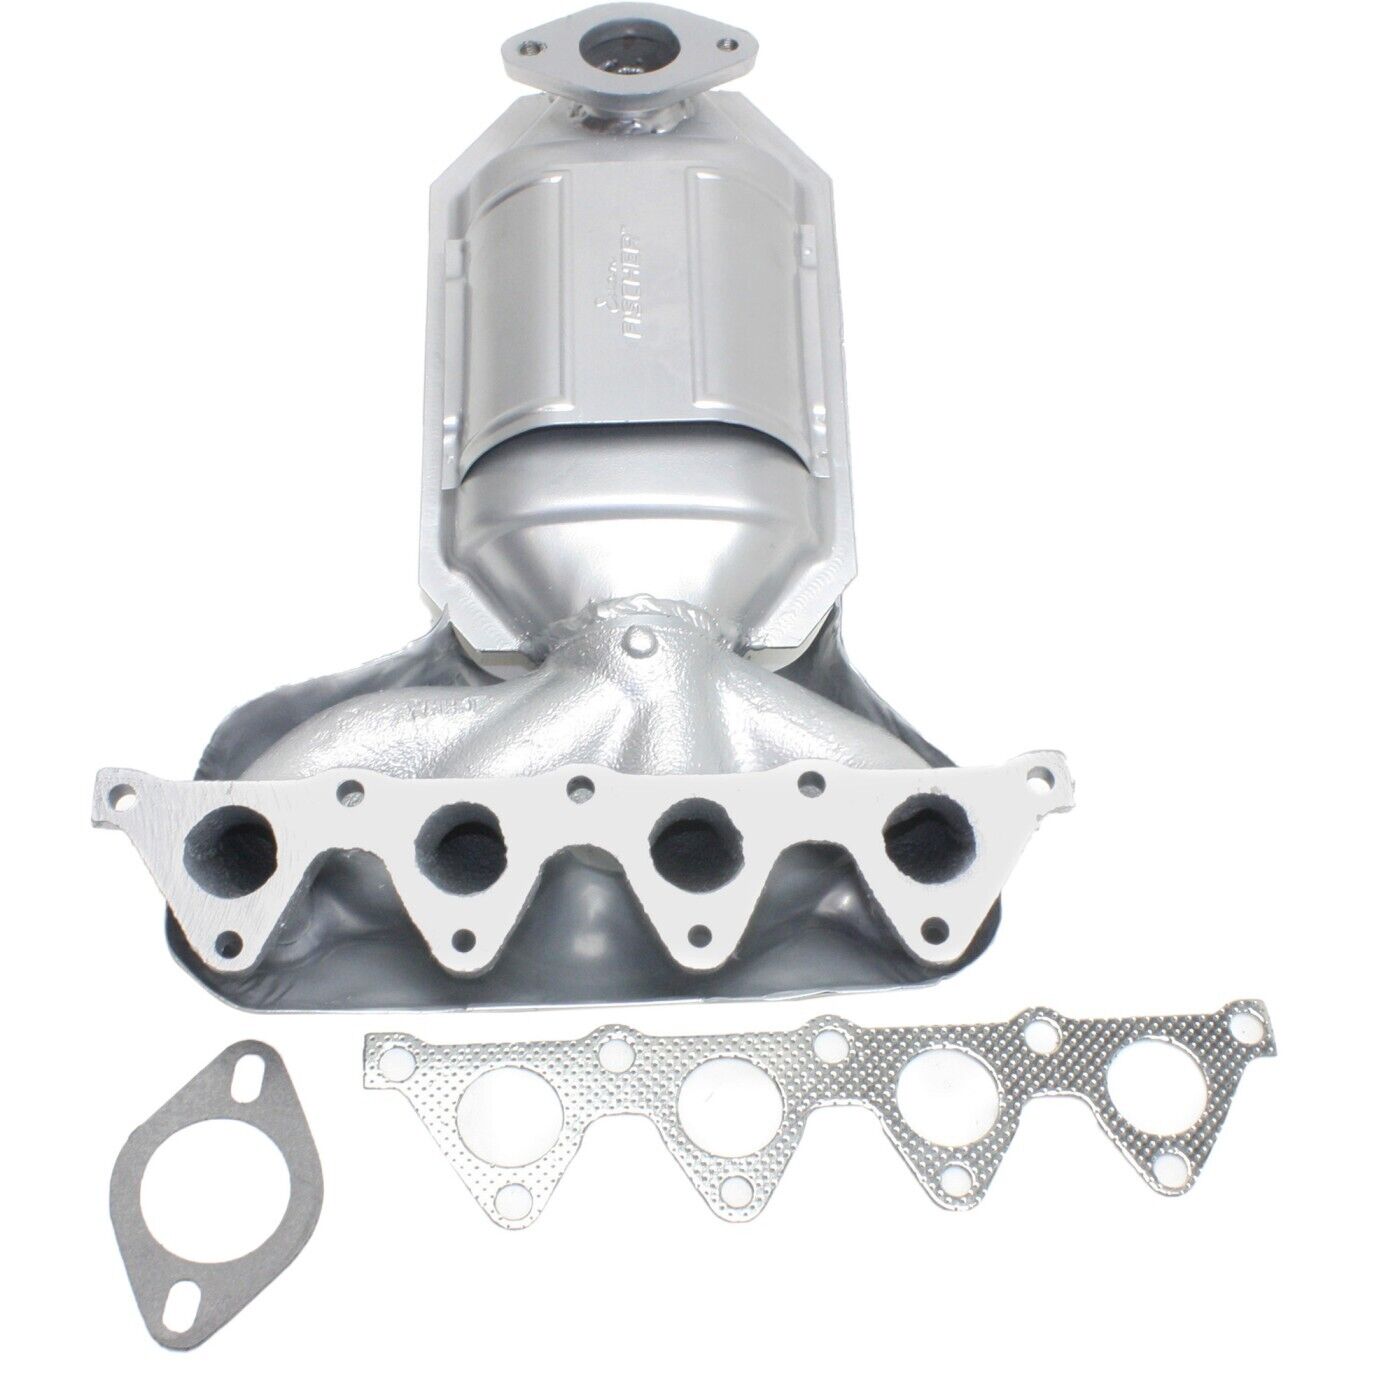 New Catalytic Converter with Exhaust Manifold for Hyundai 01-05 Accent